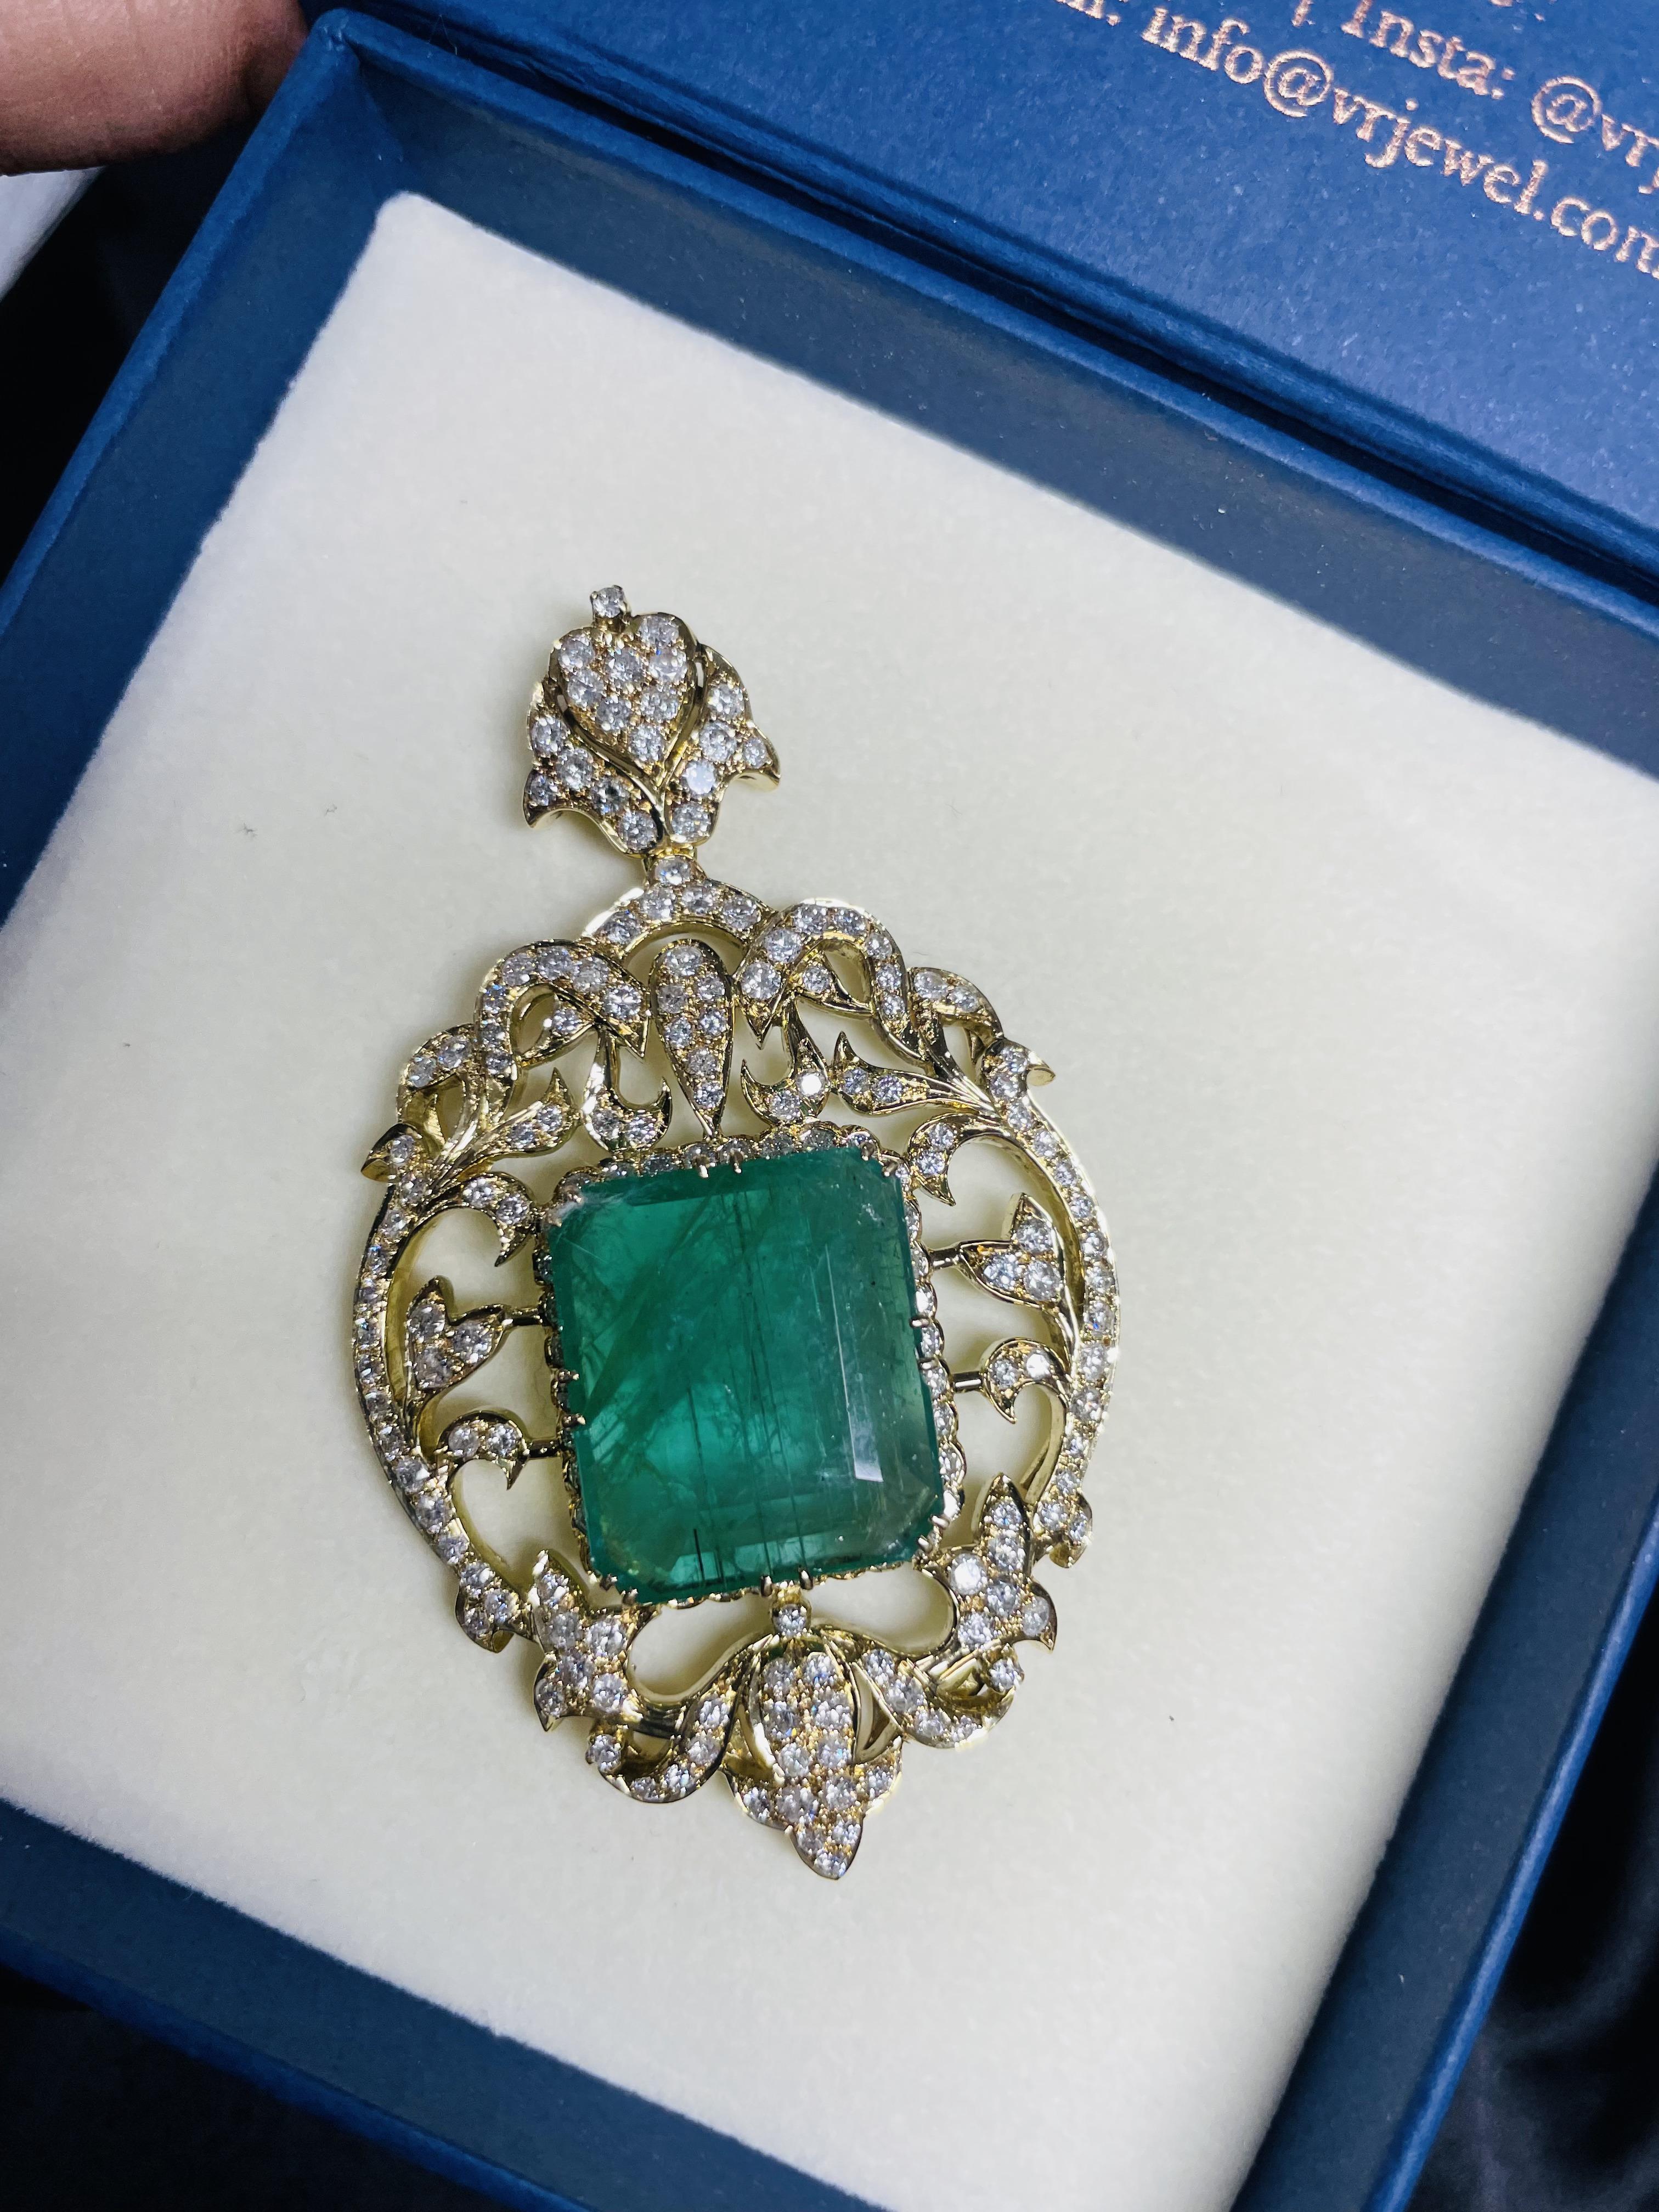 Emerald pendant in 18K Gold. It has a octagon cut emerald studded with diamonds that completes your look with a decent touch. Pendants are used to wear or gifted to represent love and promises. It's an attractive jewelry piece that goes with every